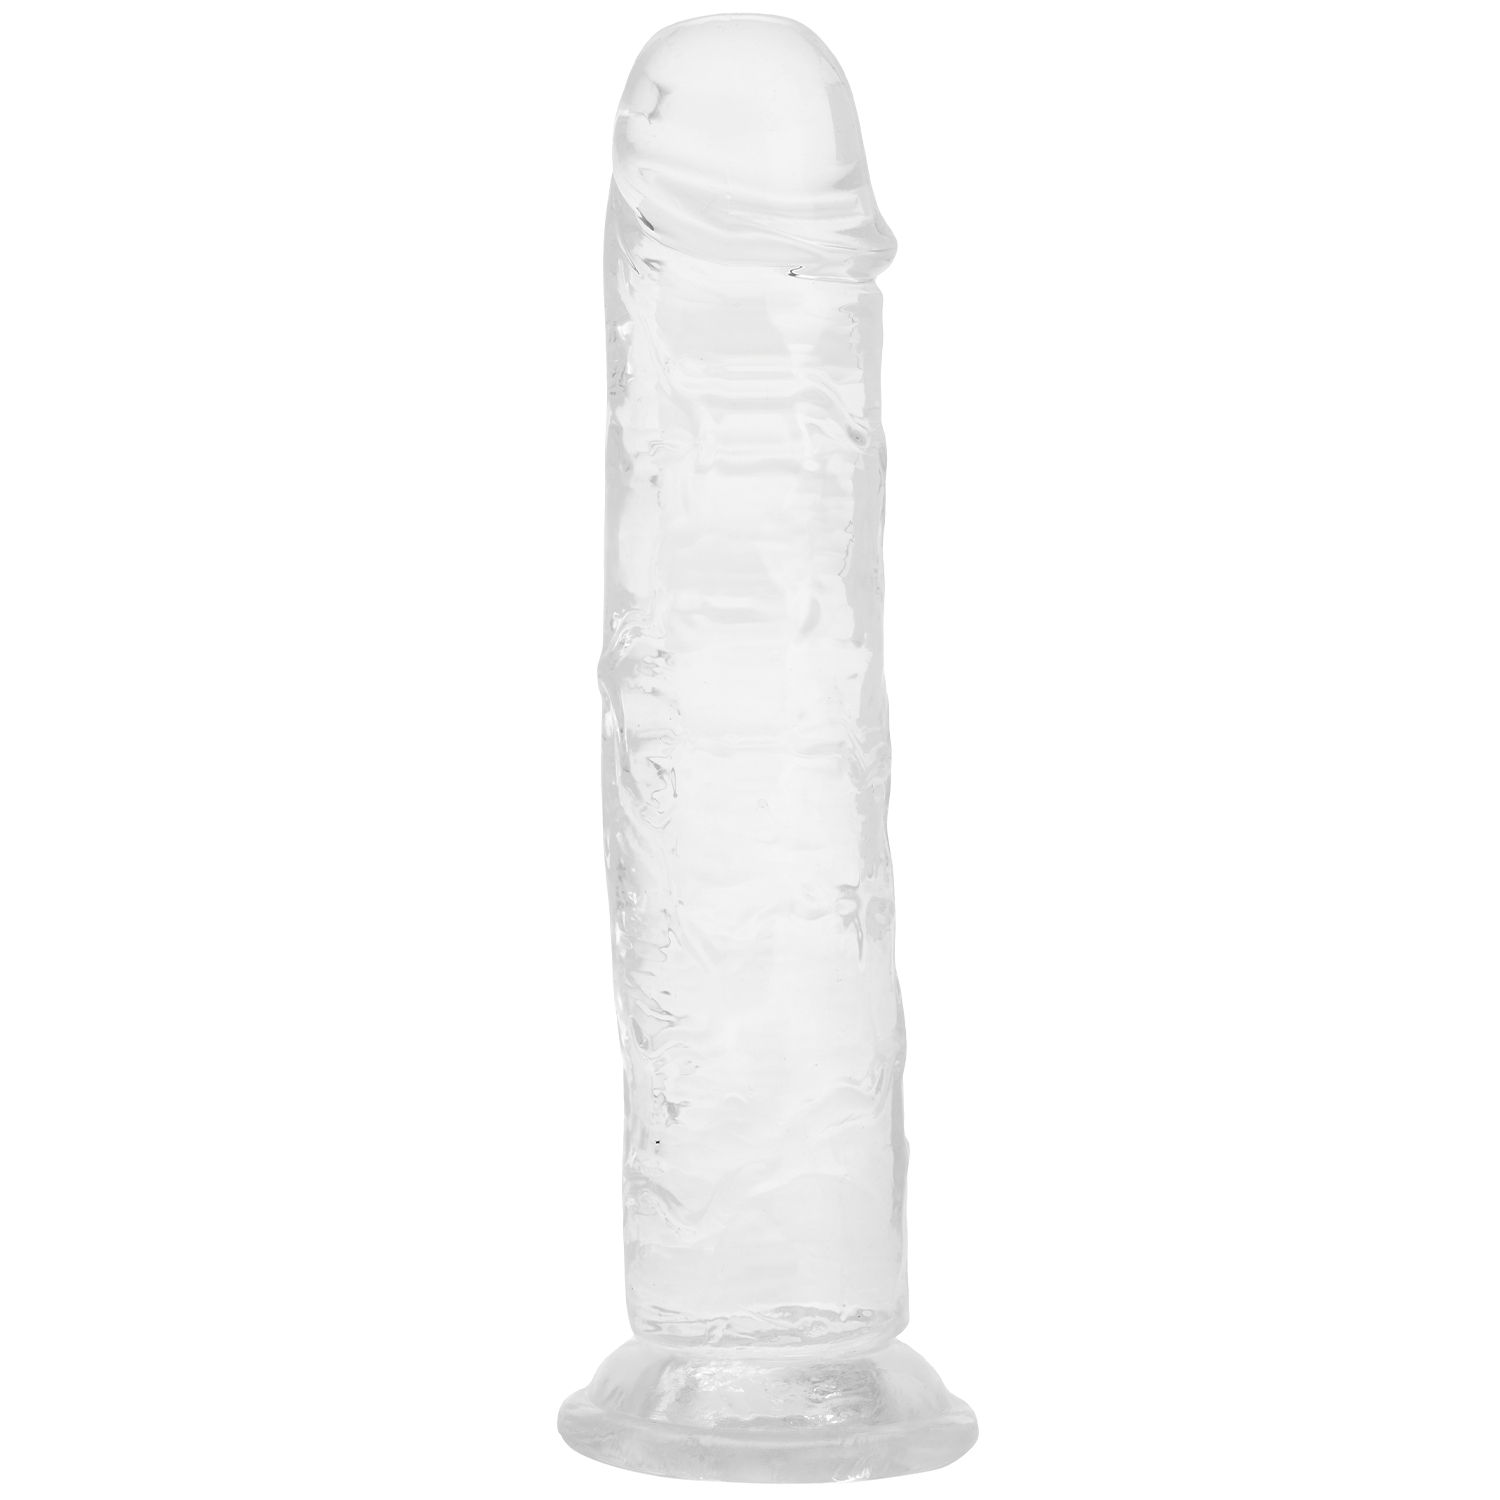 22528-willie-city-clear-realistic-suction-cup-dildo-22-cm-q100-01